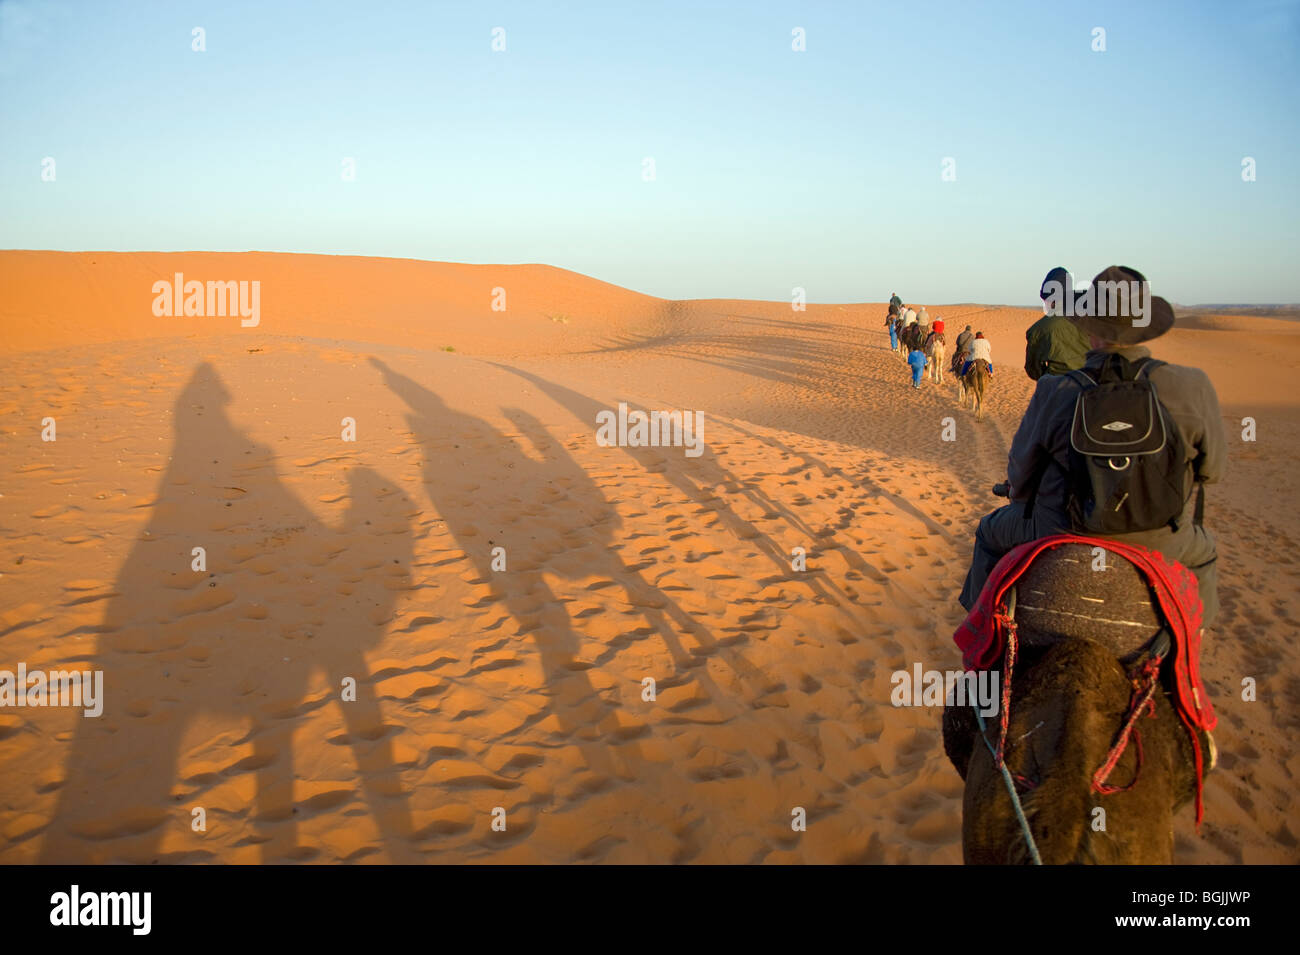 A tour group returning to base after a dawn camel ride. Shadows on the golden lit sand of the Sahara Desert, Morocco. Stock Photo